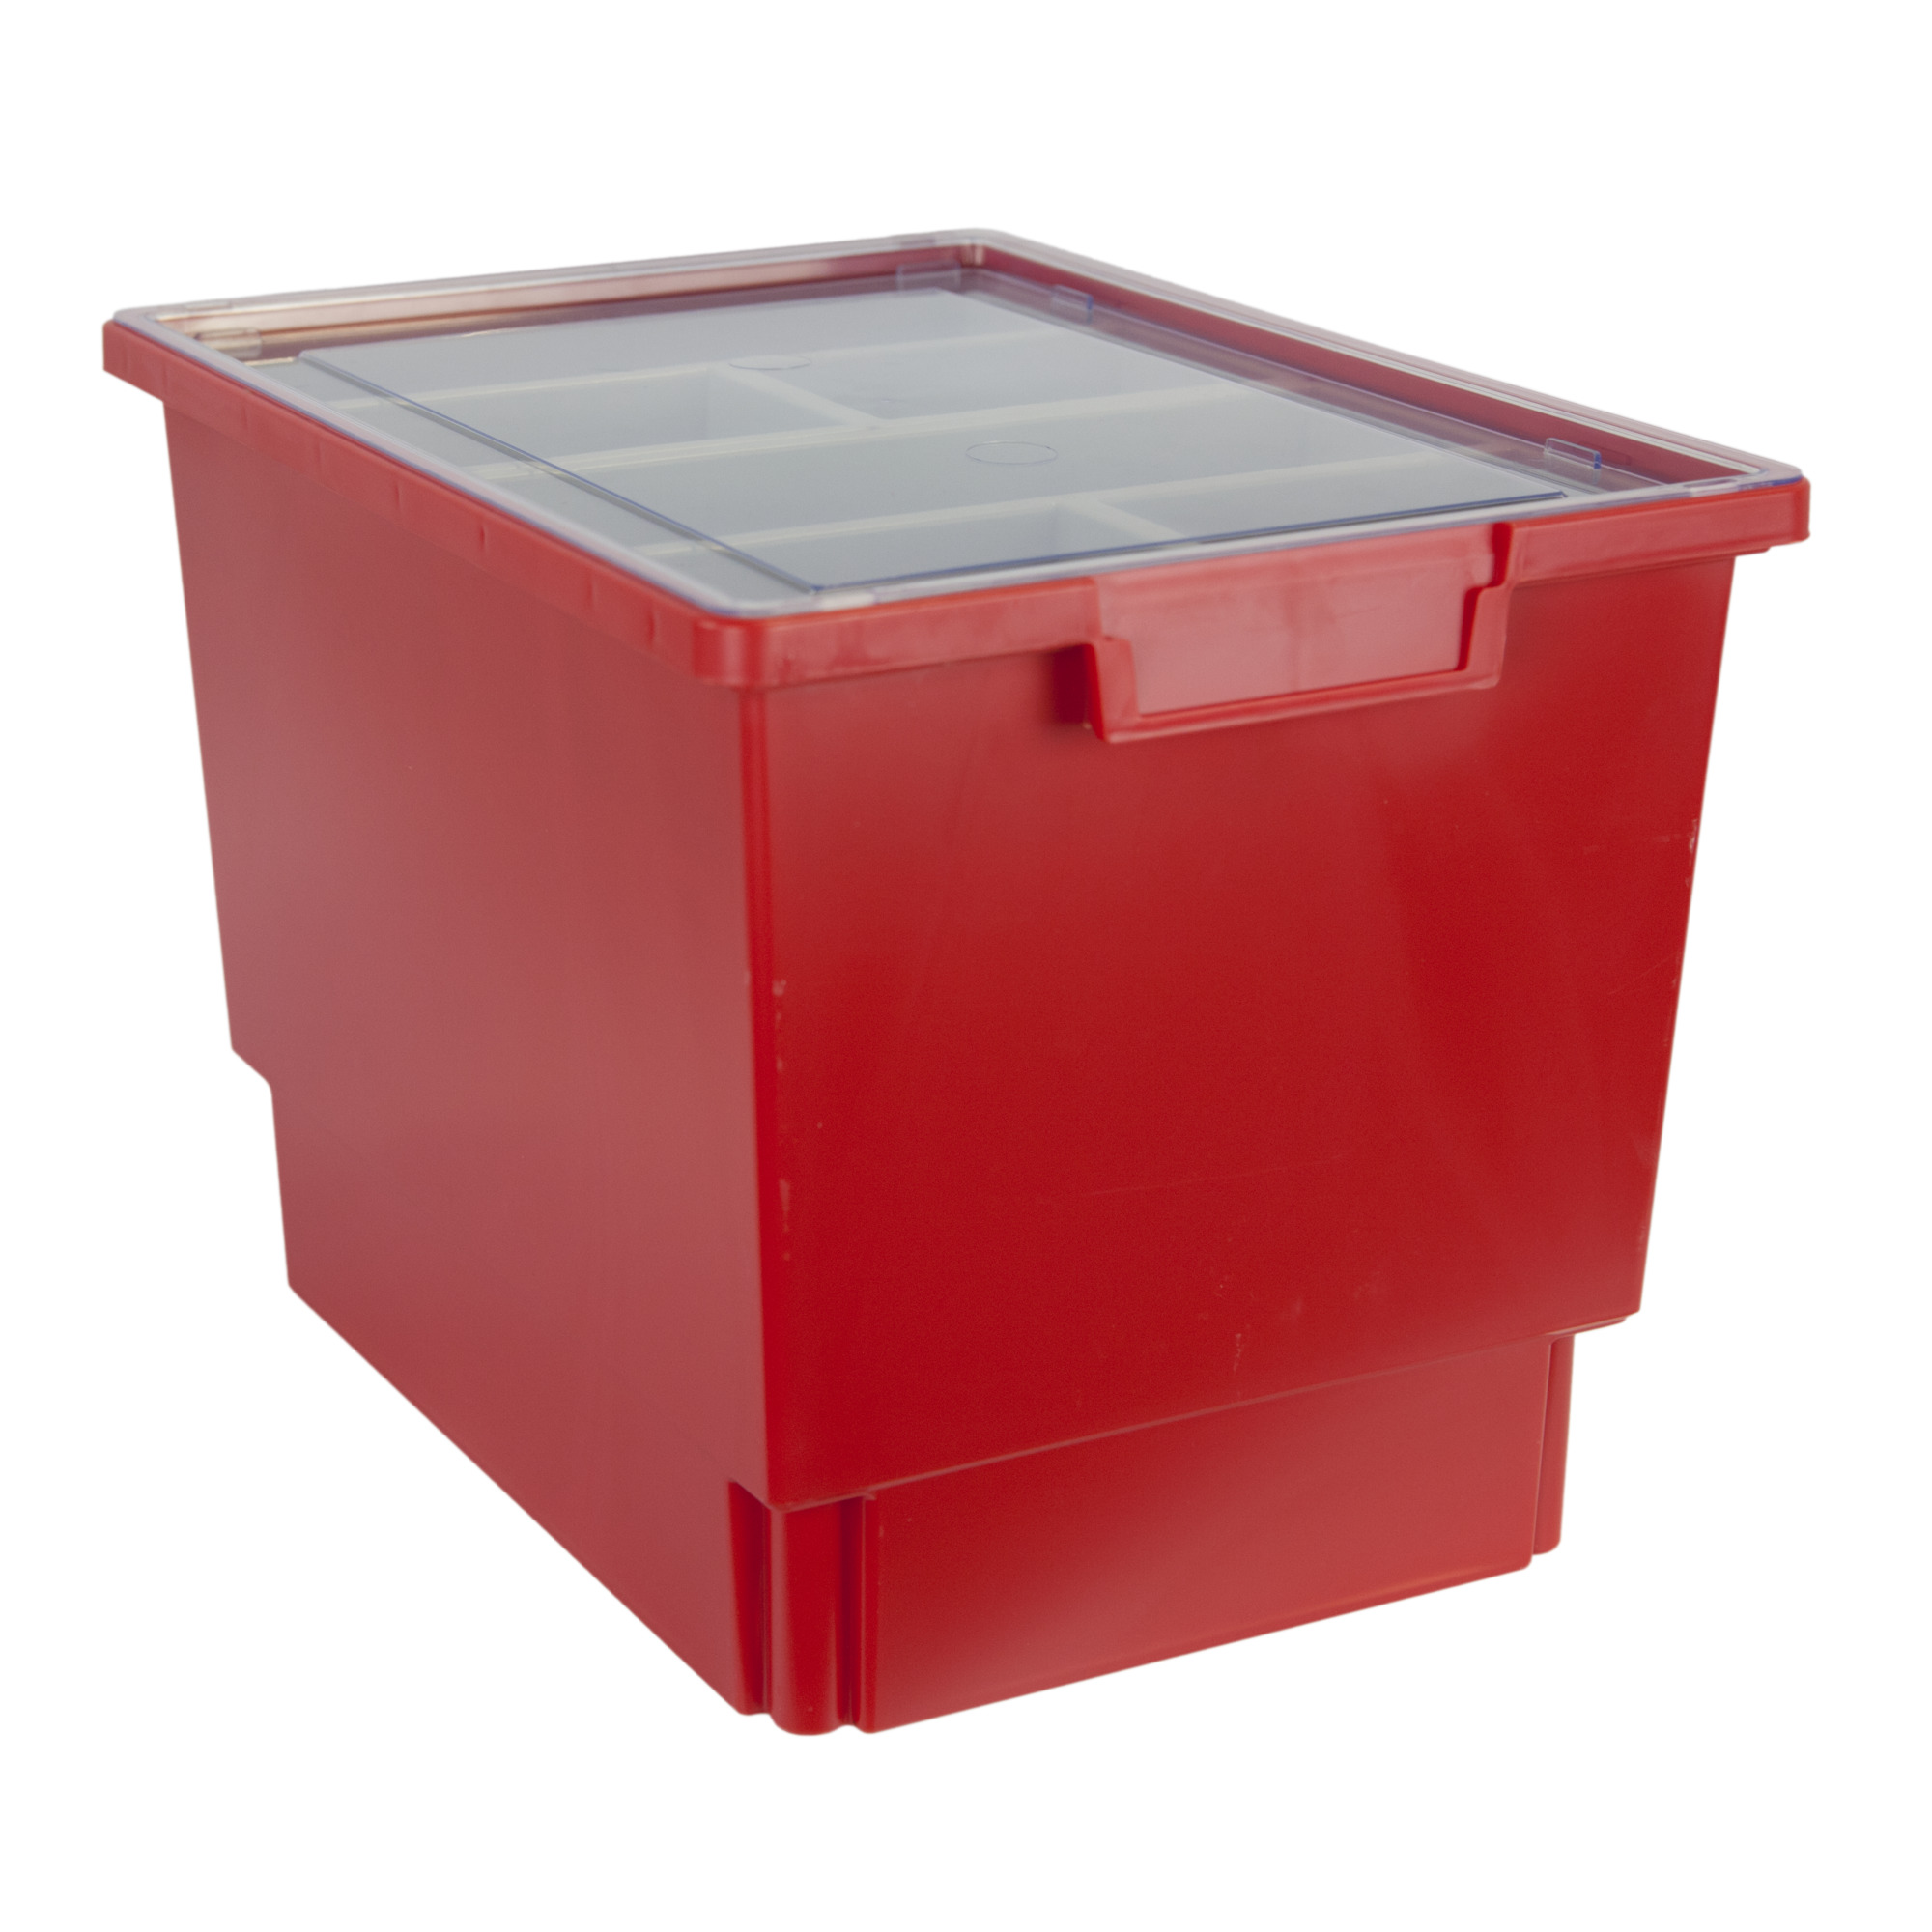 Certwood StorWerks, Slim Line 12Inch Tray Kit (3 x Divisions) Red, Included (qty.) 1, Material Plastic, Height 12 in, Model CE1954PR-NK0202-1